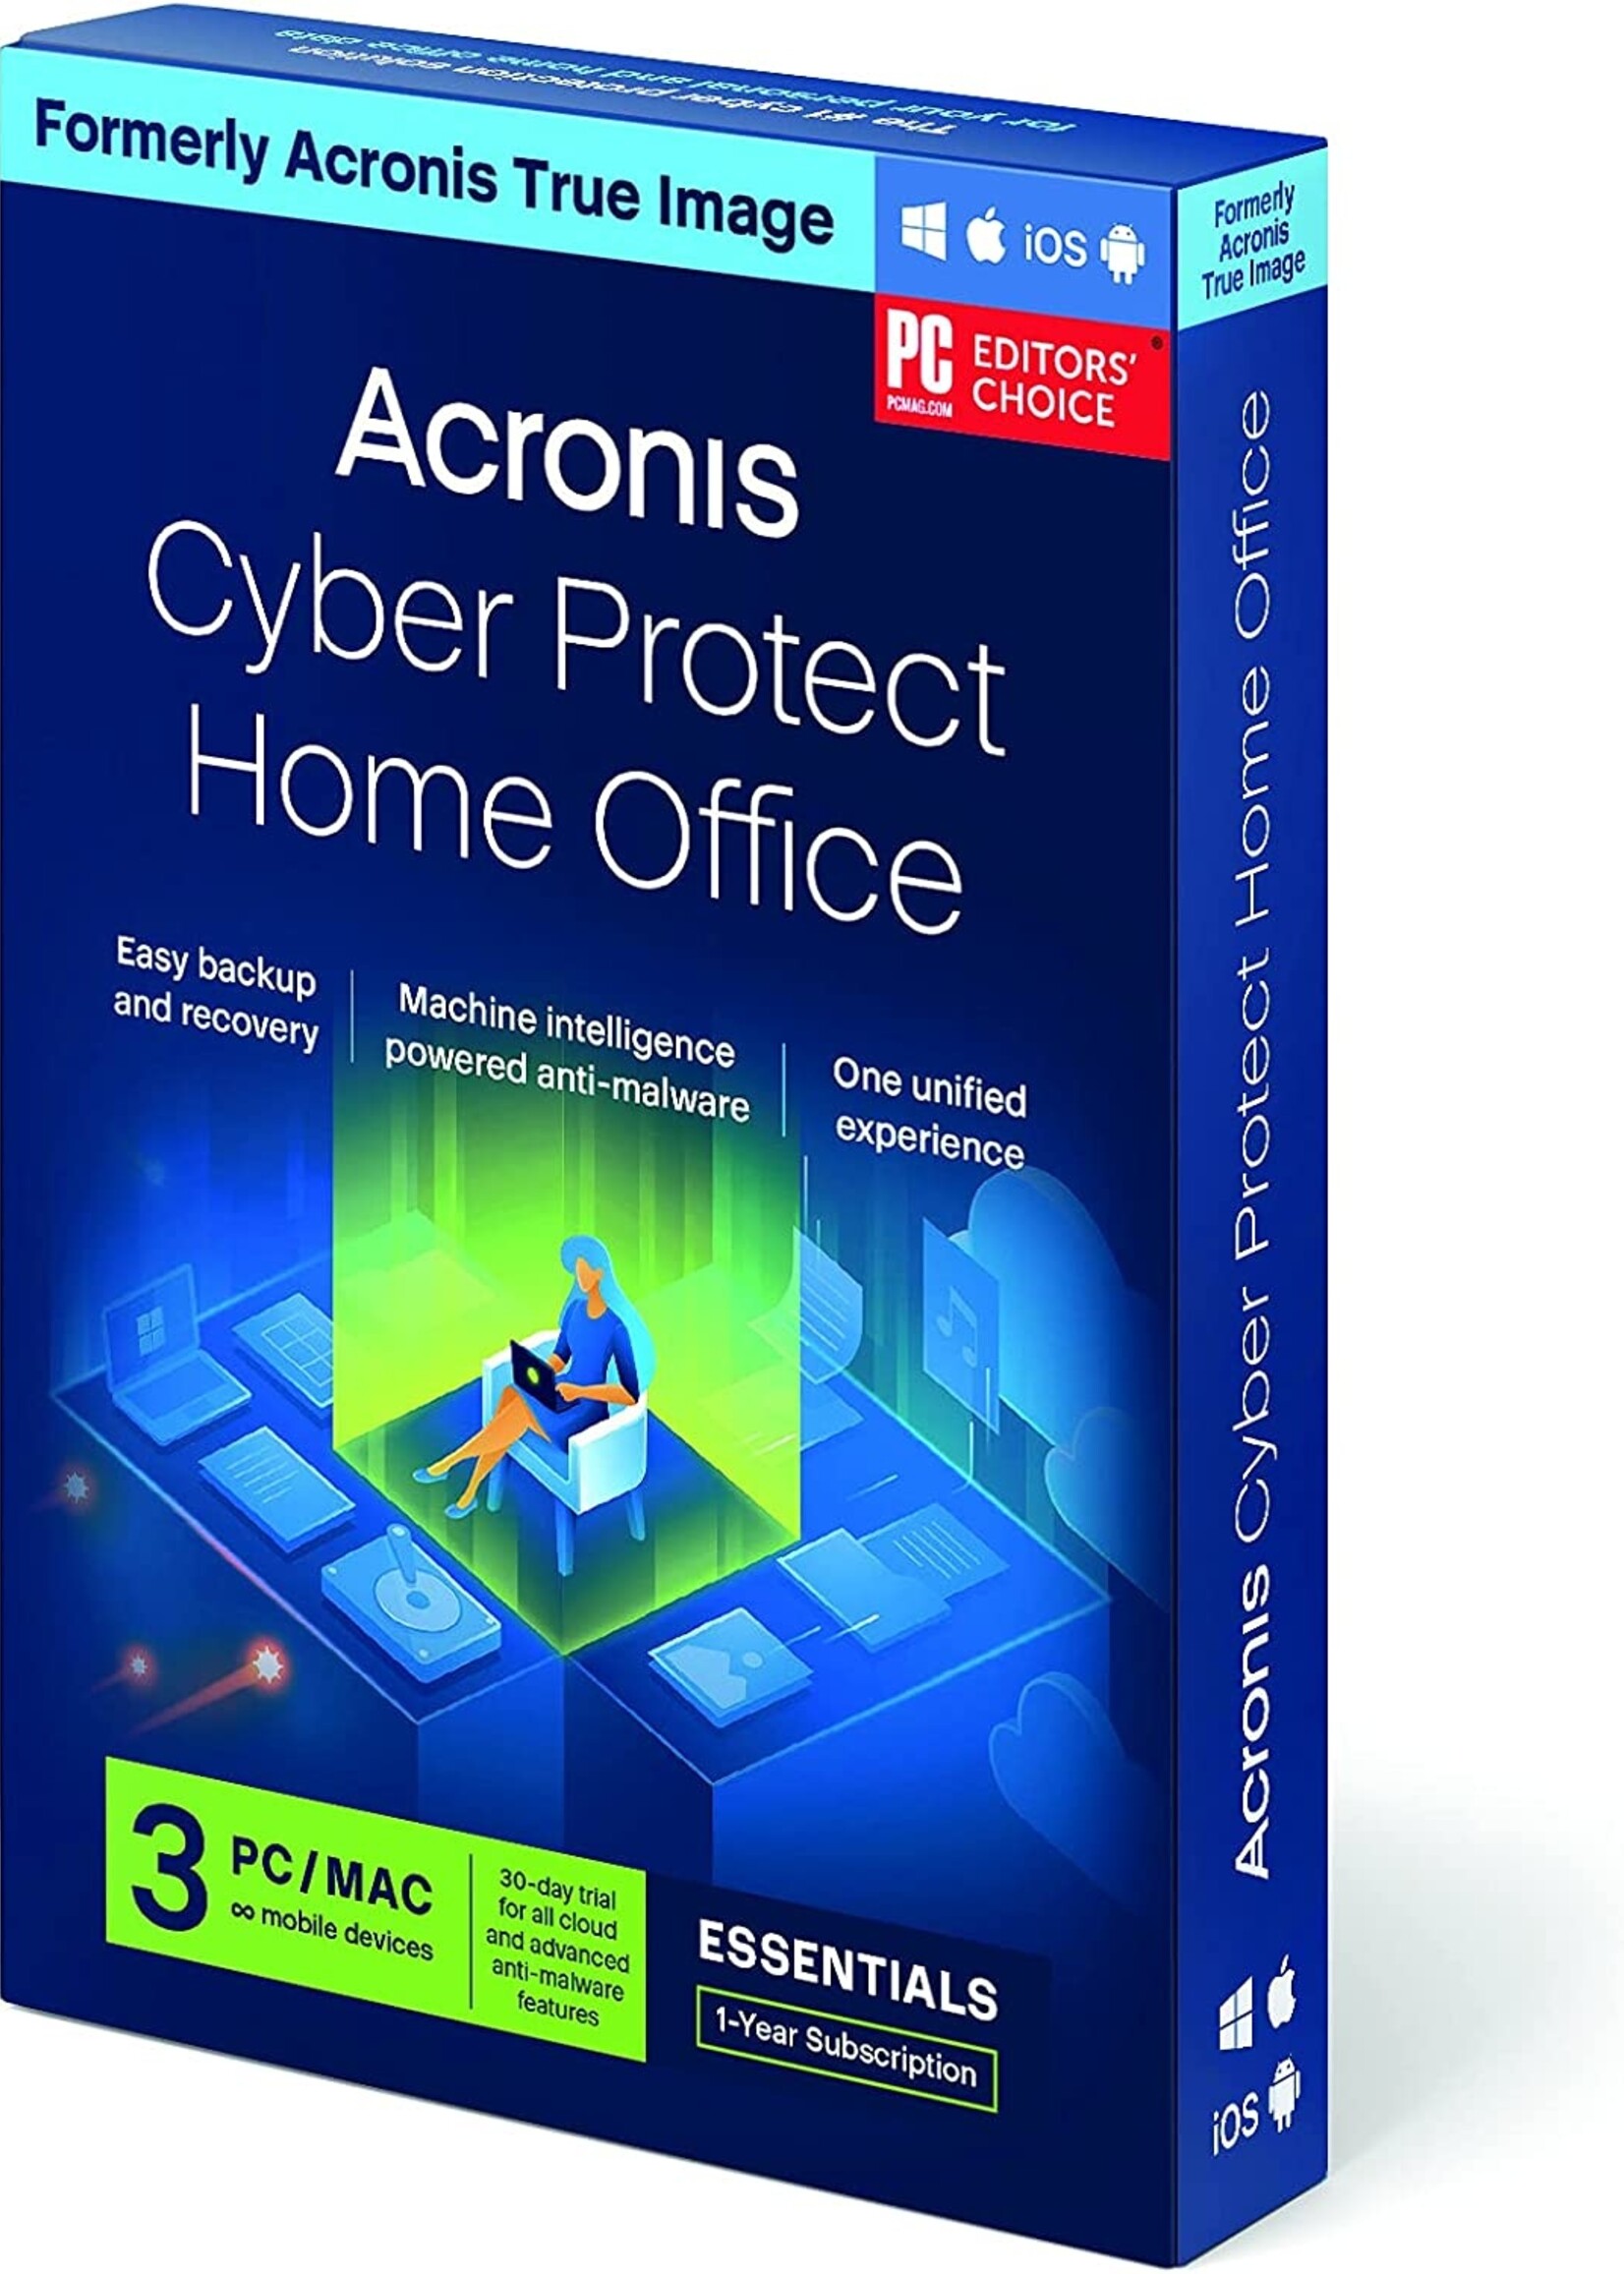 Acronis Acronis Cyber Protect Home Office 3 PC/Mac